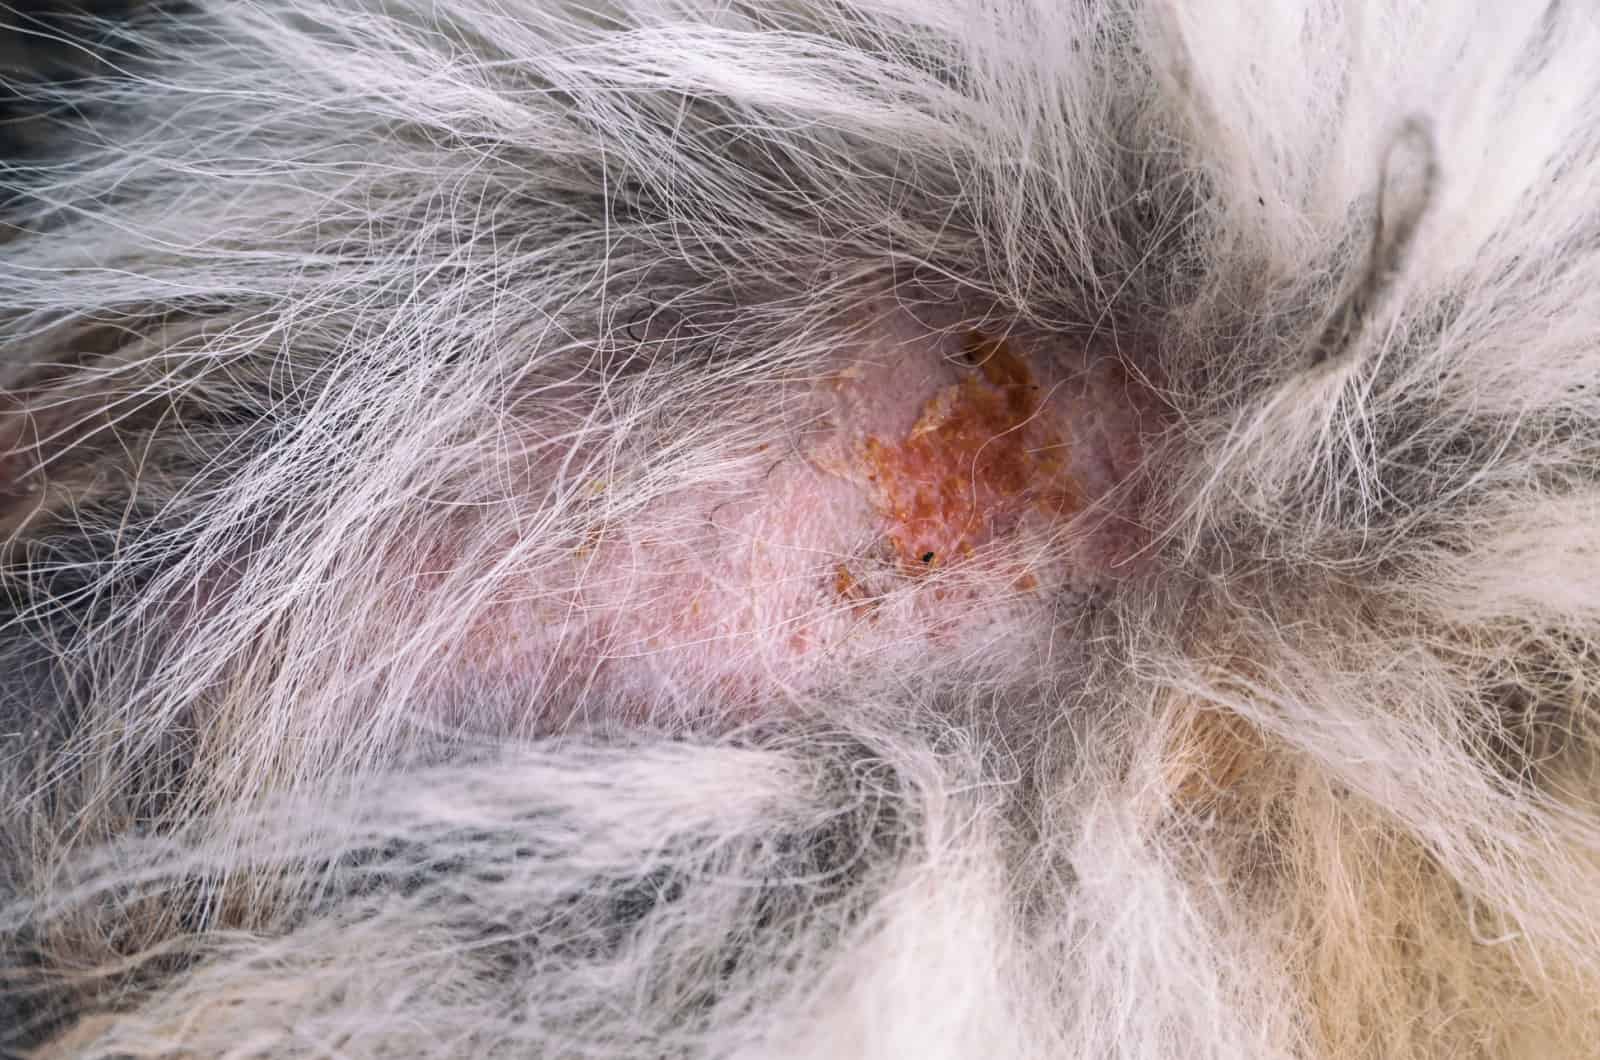 Are Crusty Scabs On Dogs Back Dangerous, And How Can We Help?